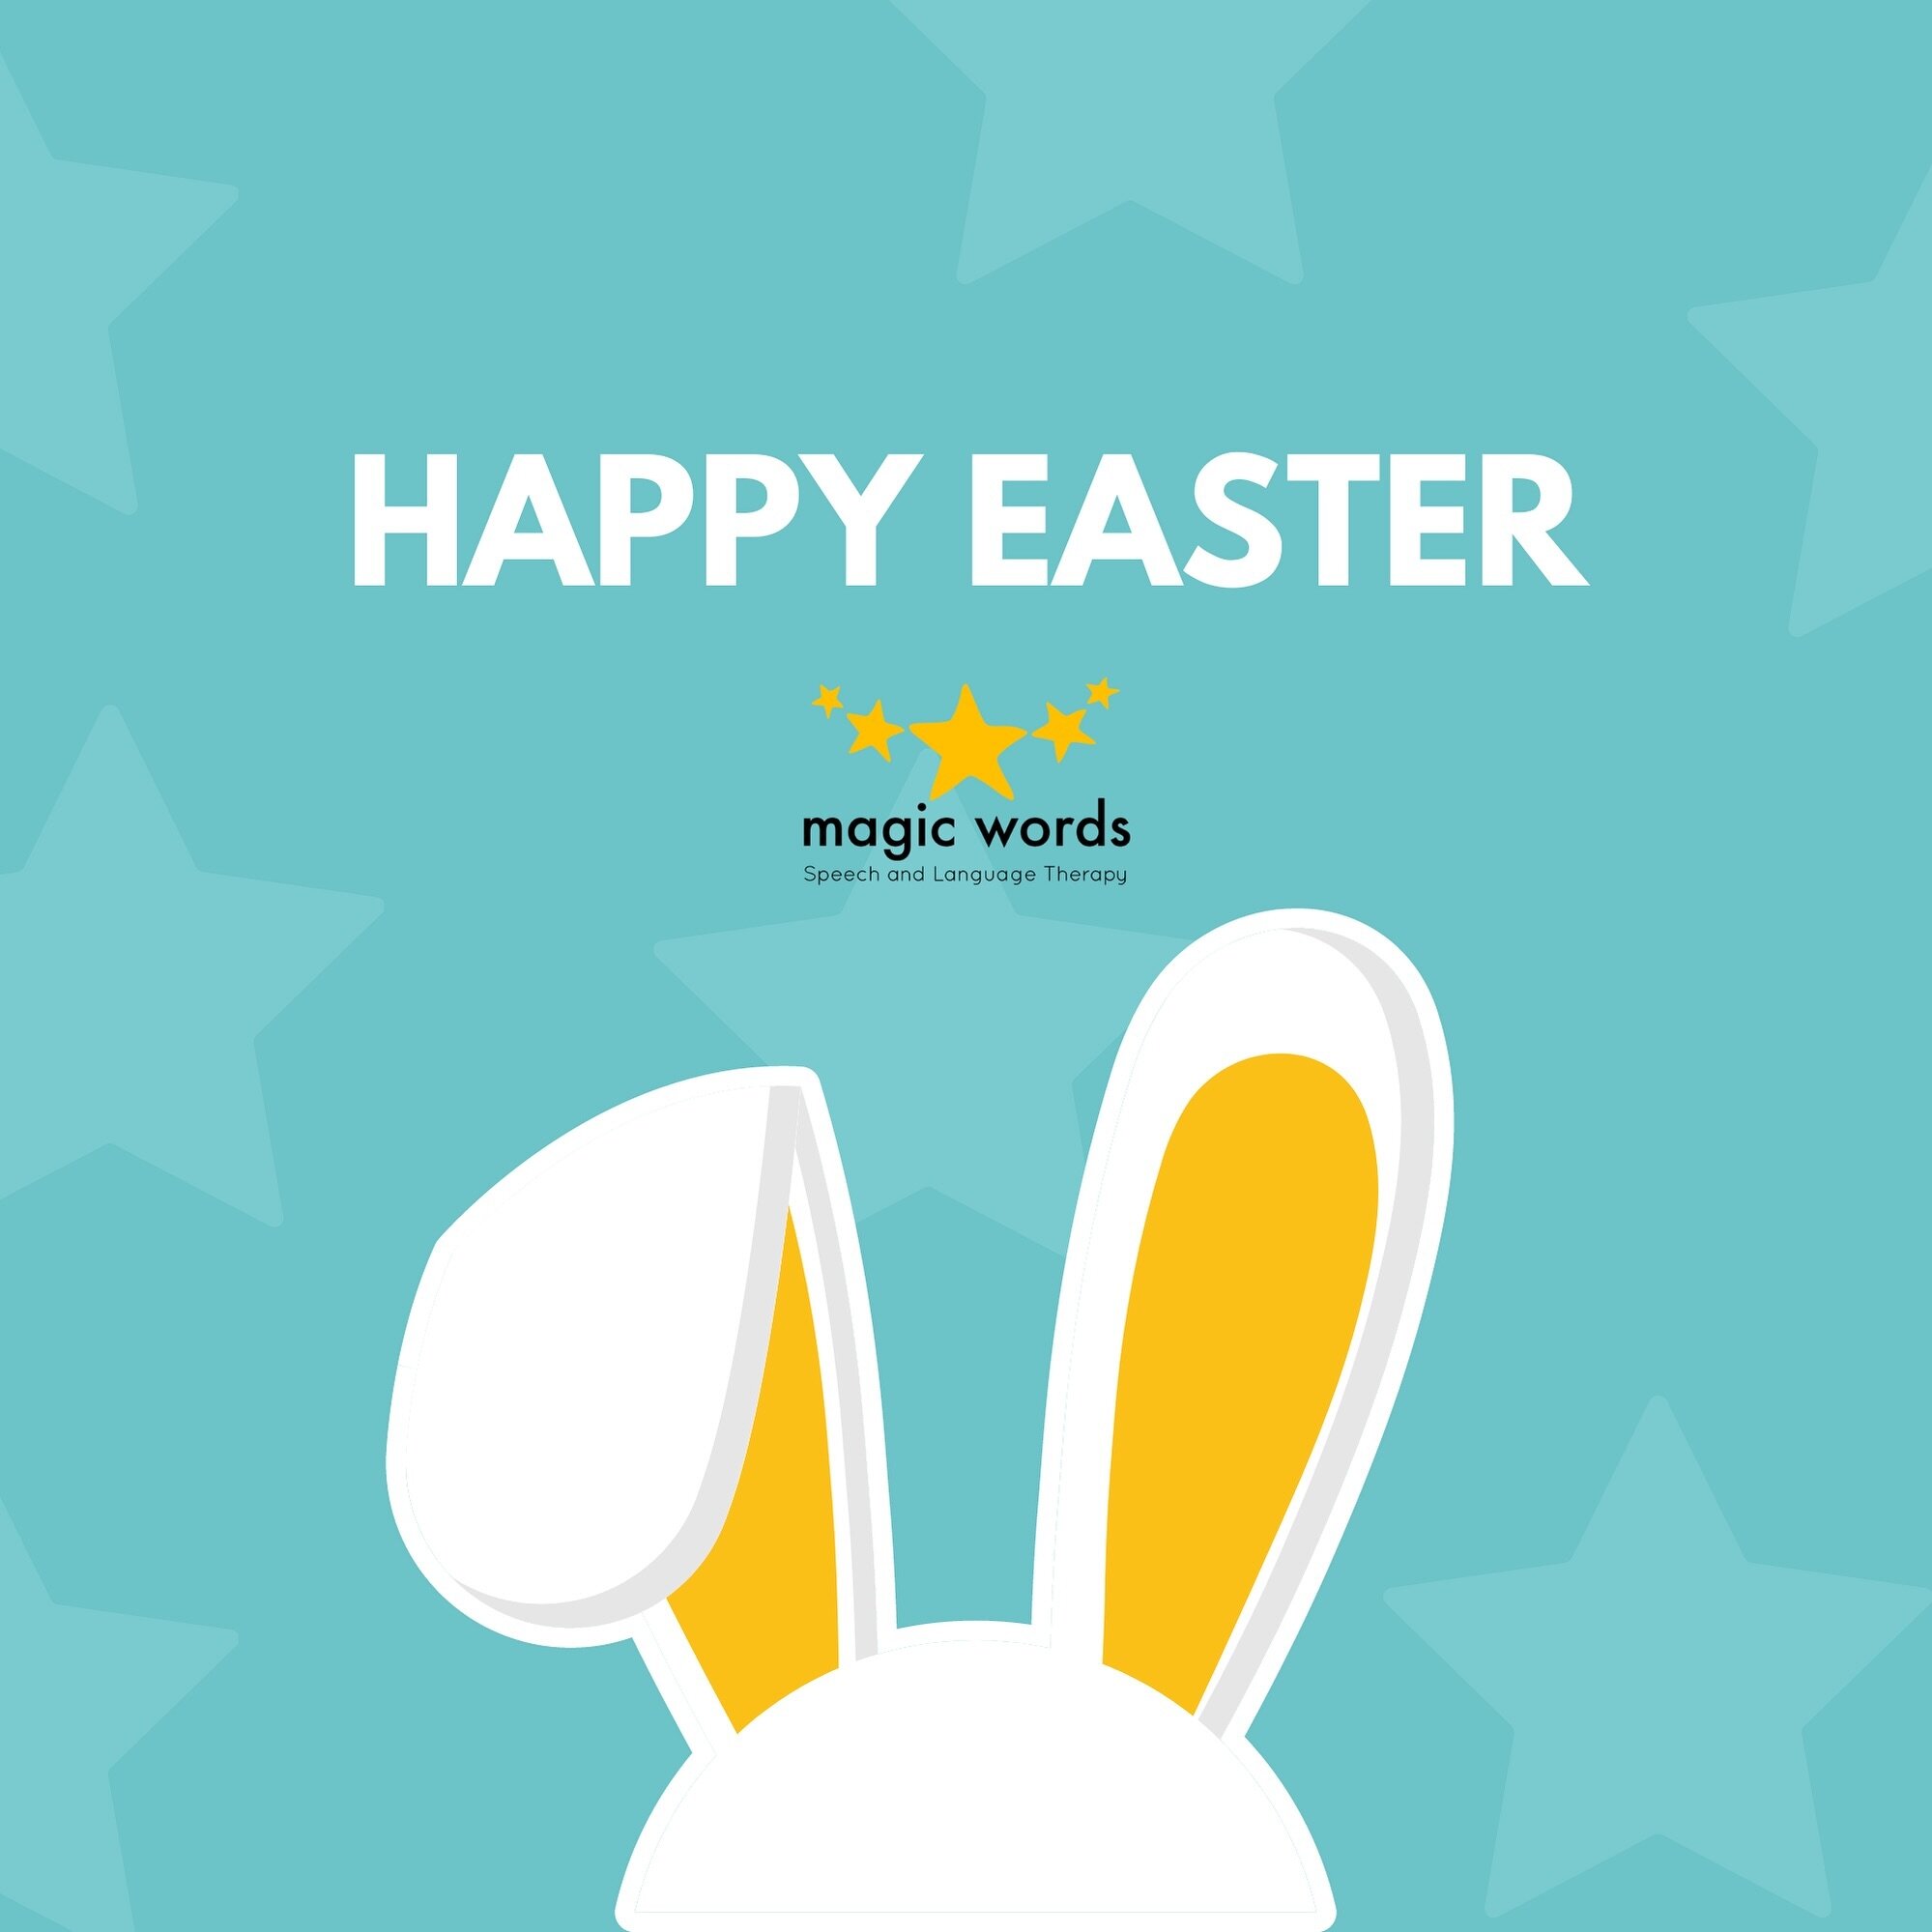 Wishing you a joyful Easter from the entire team at Magic Words! Whether you&rsquo;re on the hunt for eggs, indulging in chocolate treats, or spending time at church, or nothing at all - we hope your day is filled with happiness and celebration.⁣
⁣
#